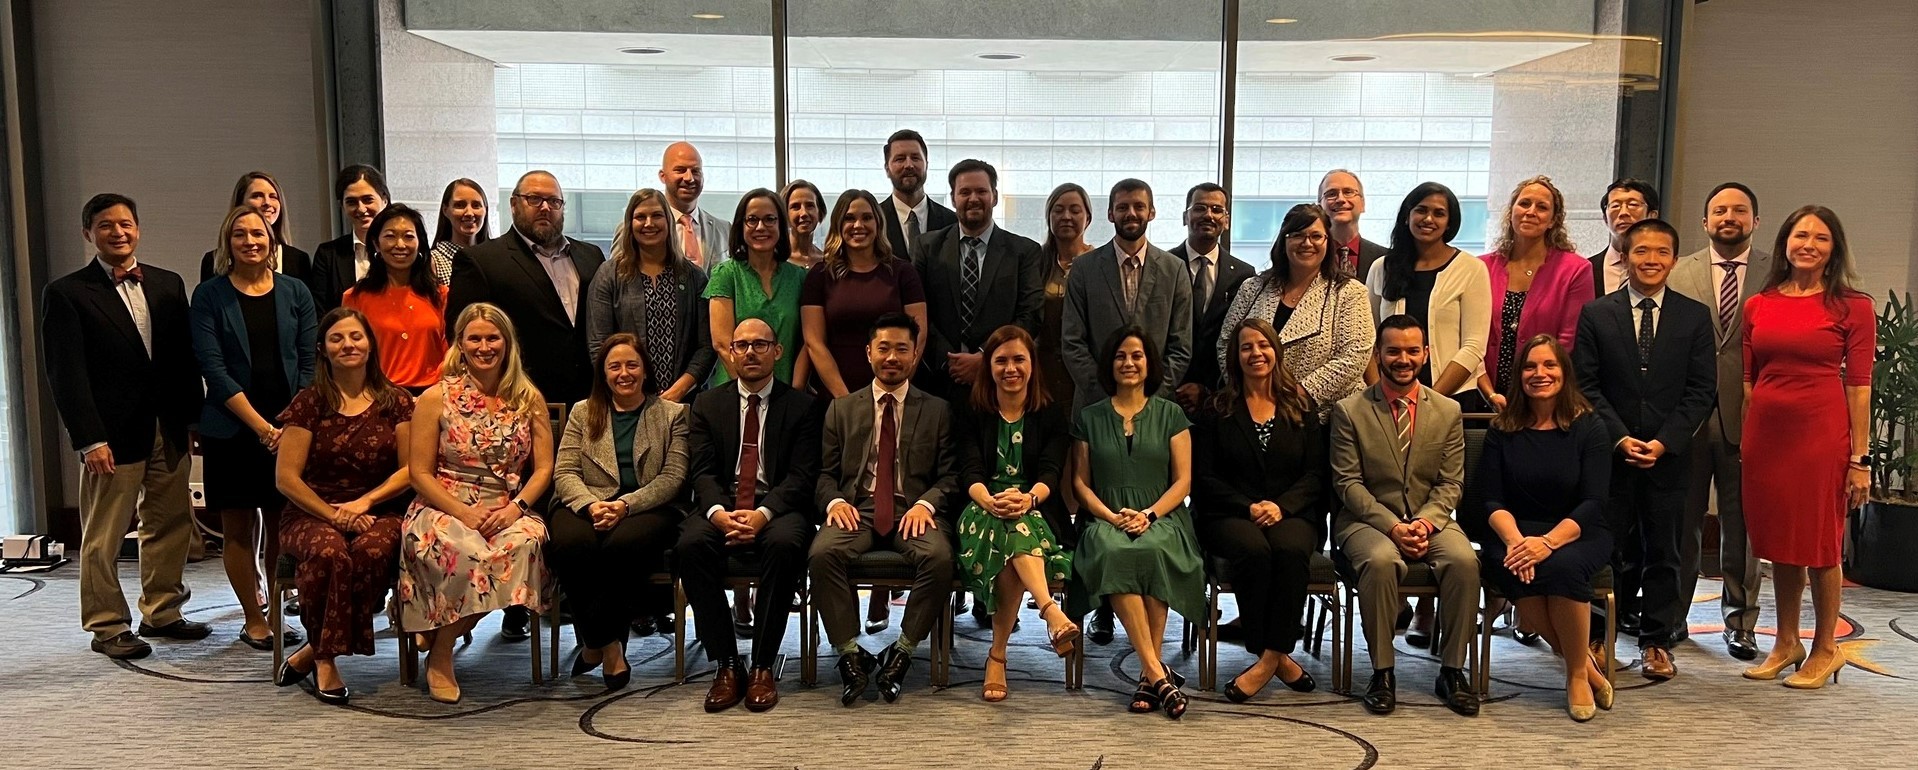 This year’s ACCP fellows gathered for a group photo during the Global Conference on Clinical Pharmacy in San Francisco